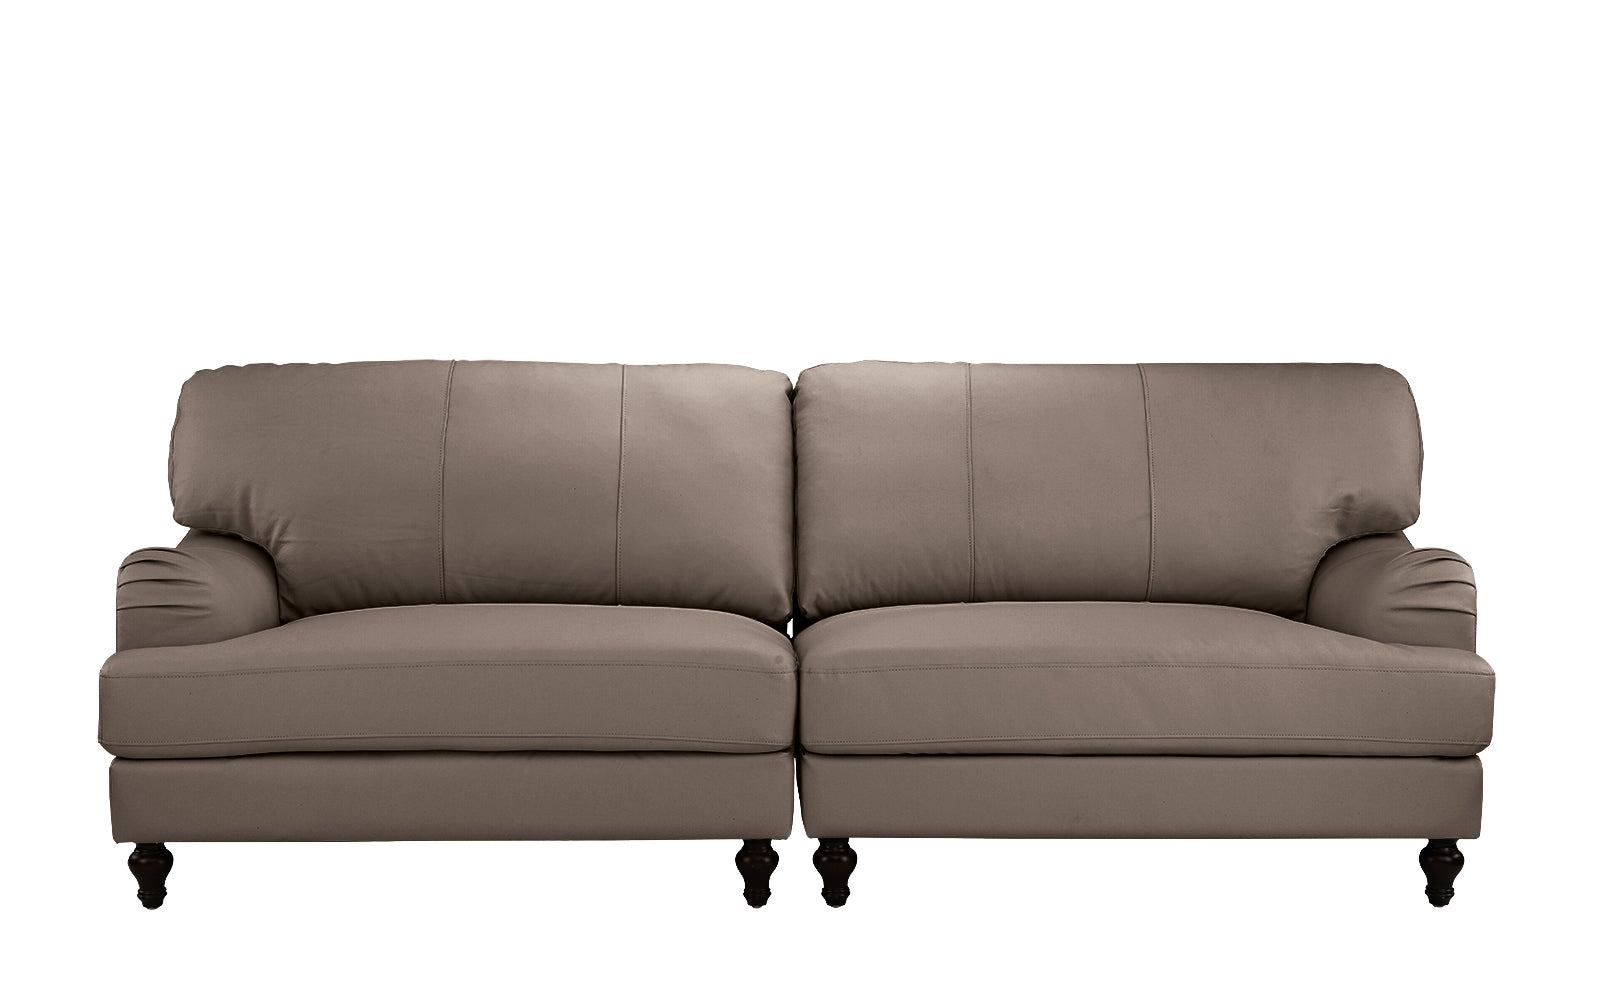 EXP259-GR Evelyn Classic Convertible Leather Match Sofa sku EXP259-GR